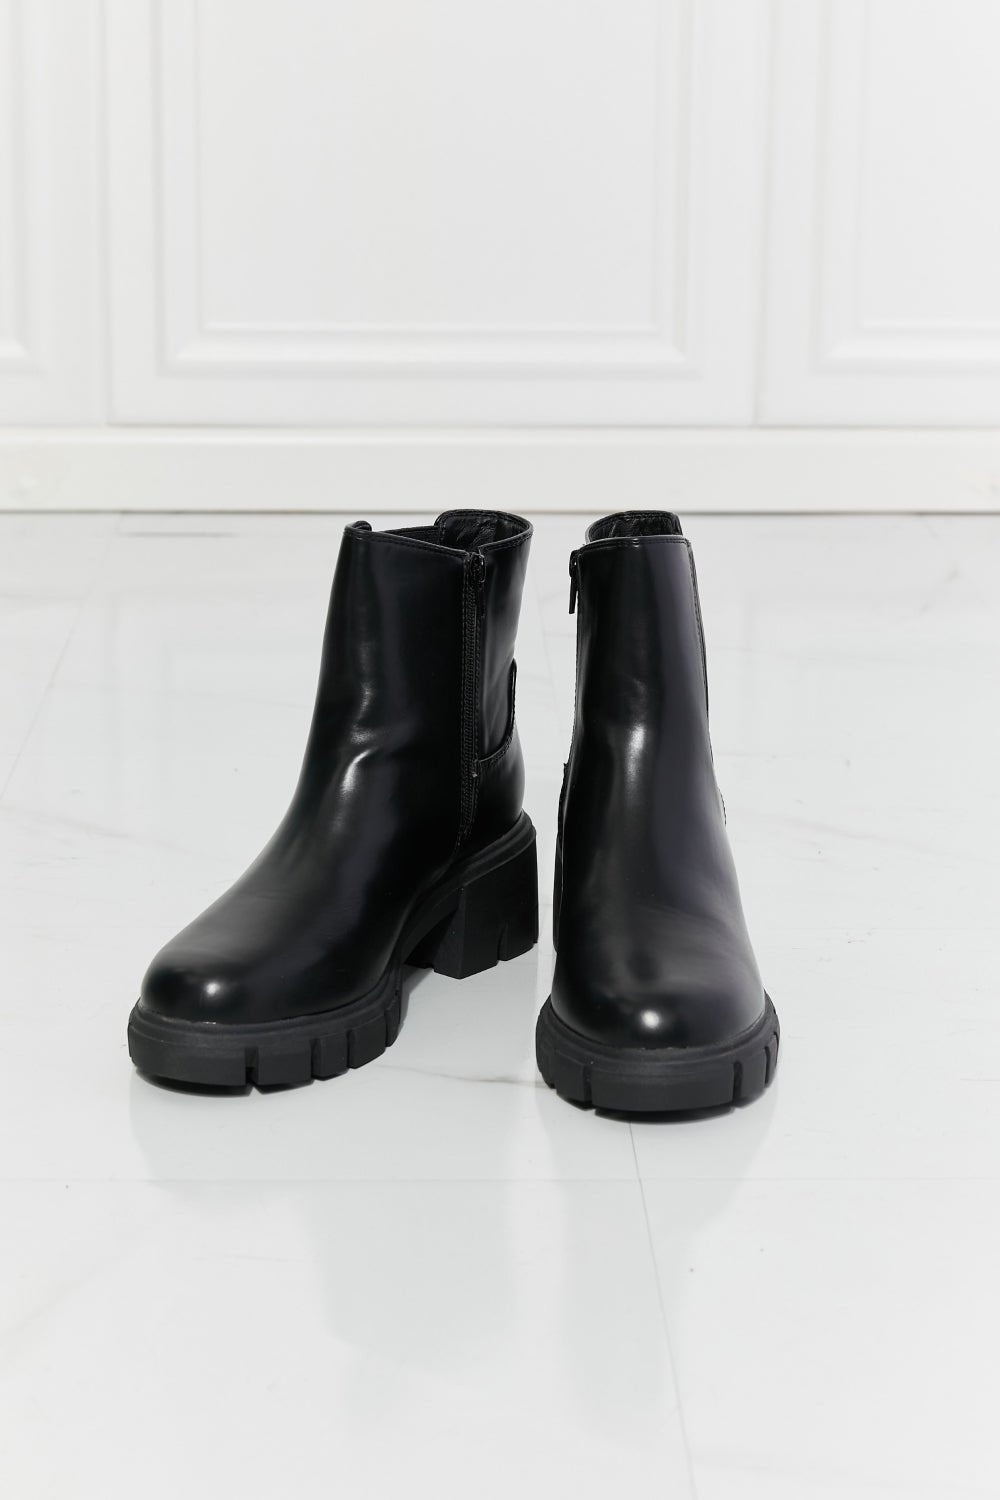 What It Takes Lug Sole Chelsea Boots in Black - Mack & Harvie